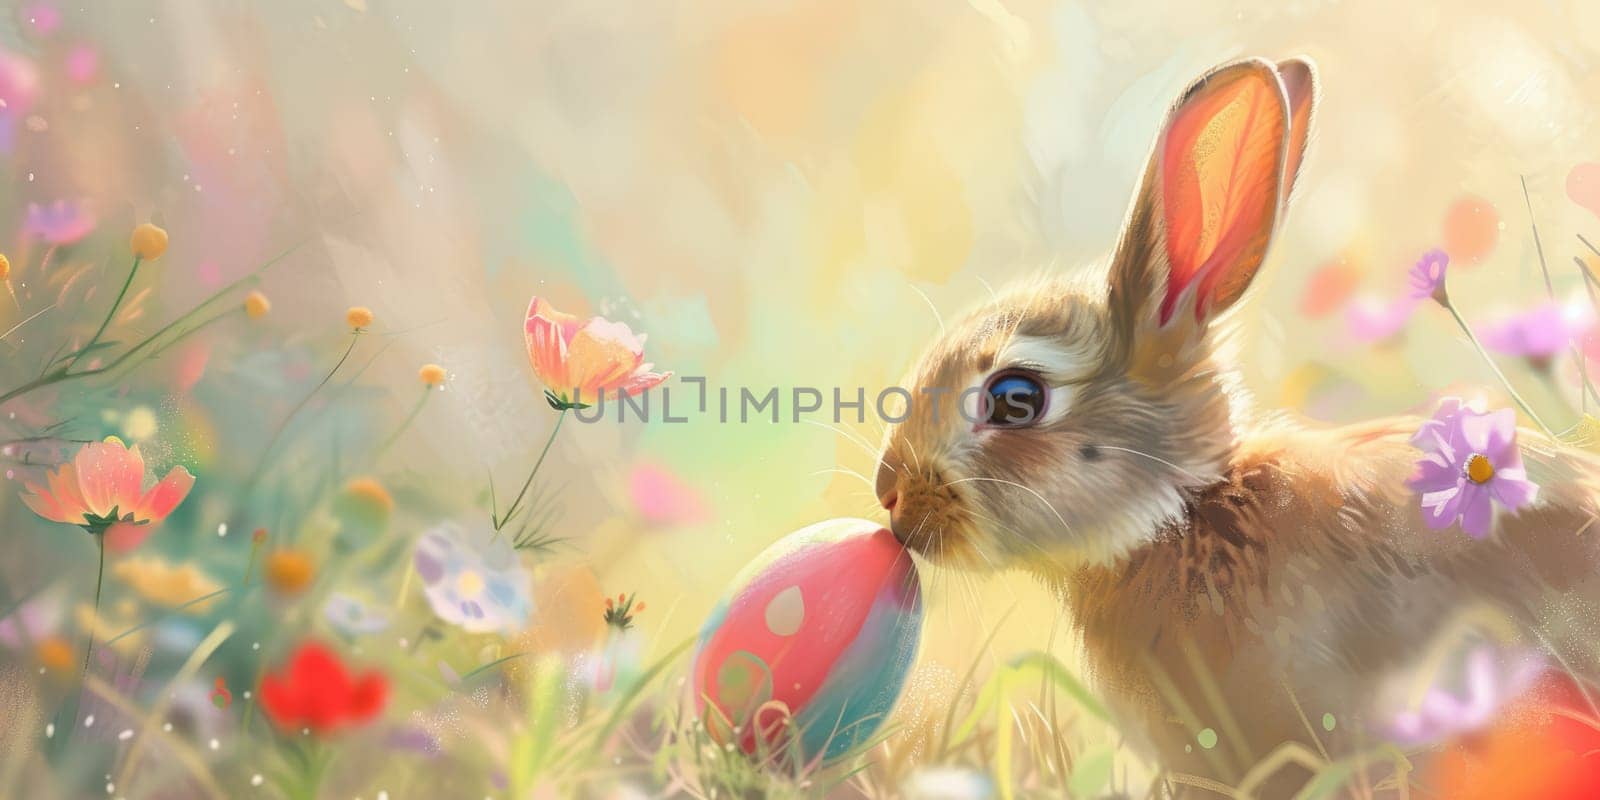 Two rabbits, one fawn and one wood rabbit, are holding an Easter egg in their mouths. This adorable wildlife painting captures the Easter event perfectly AIG42E